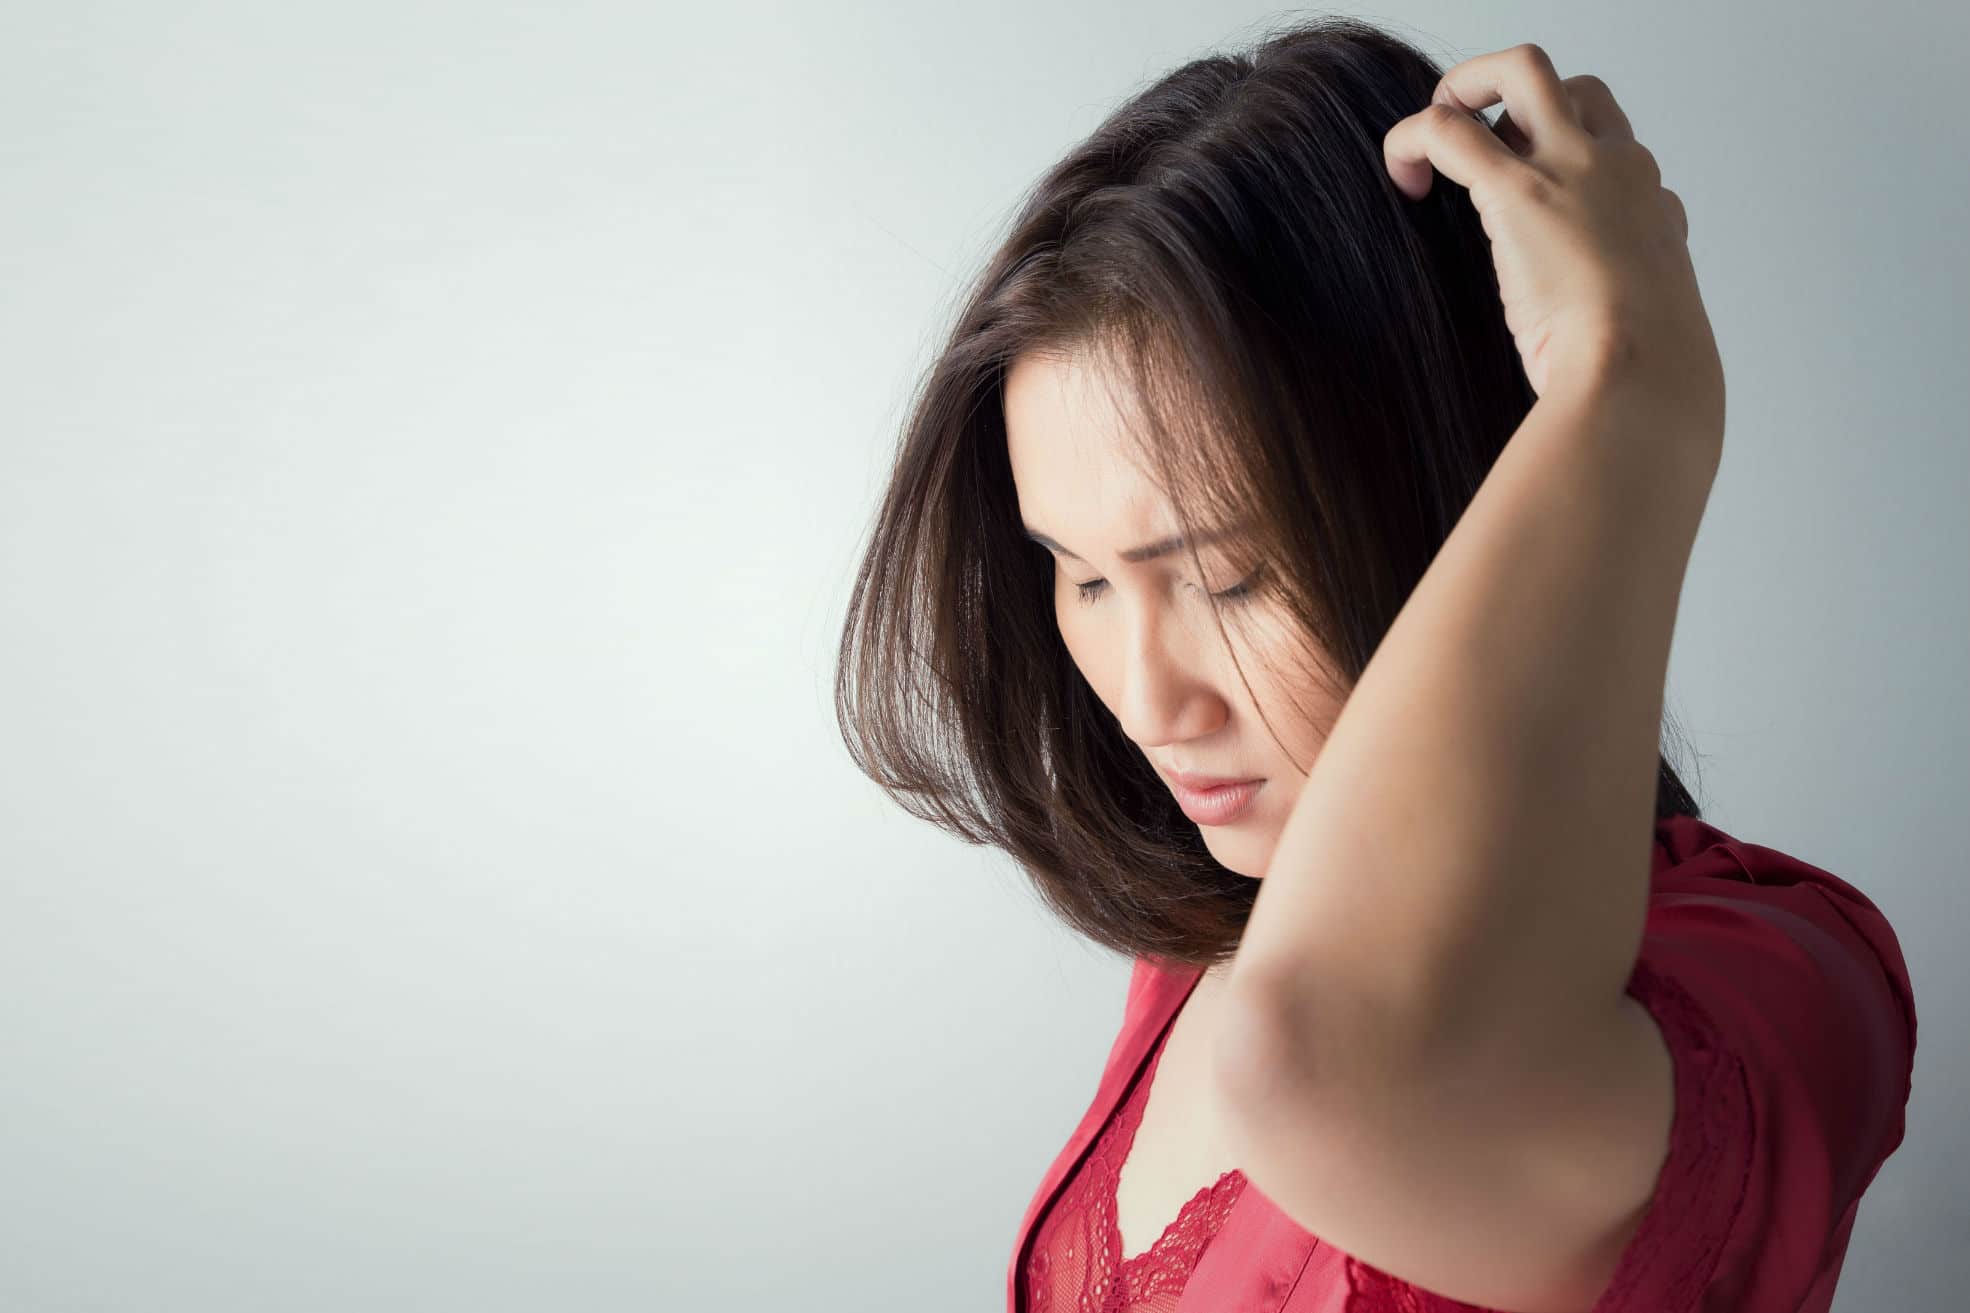 Itchy Scalp & Hair Loss - Treat a Dry Scalp to Prevent Hair Loss